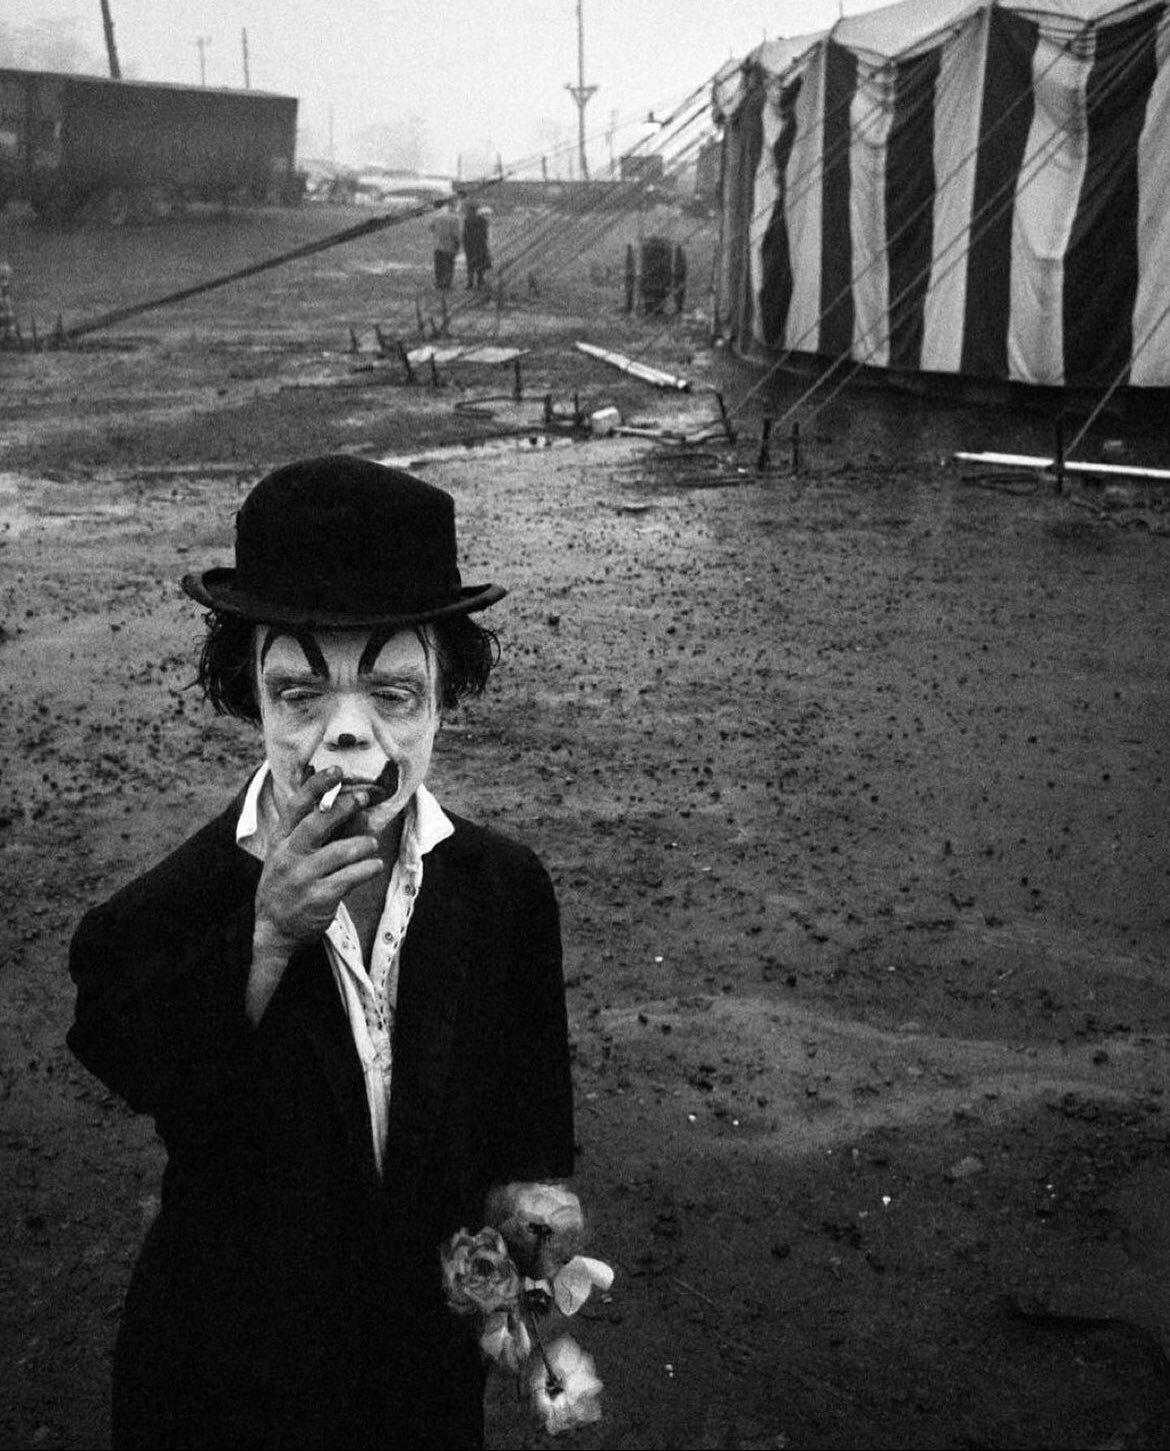 Jimmy Armstrong, circus clown 1958